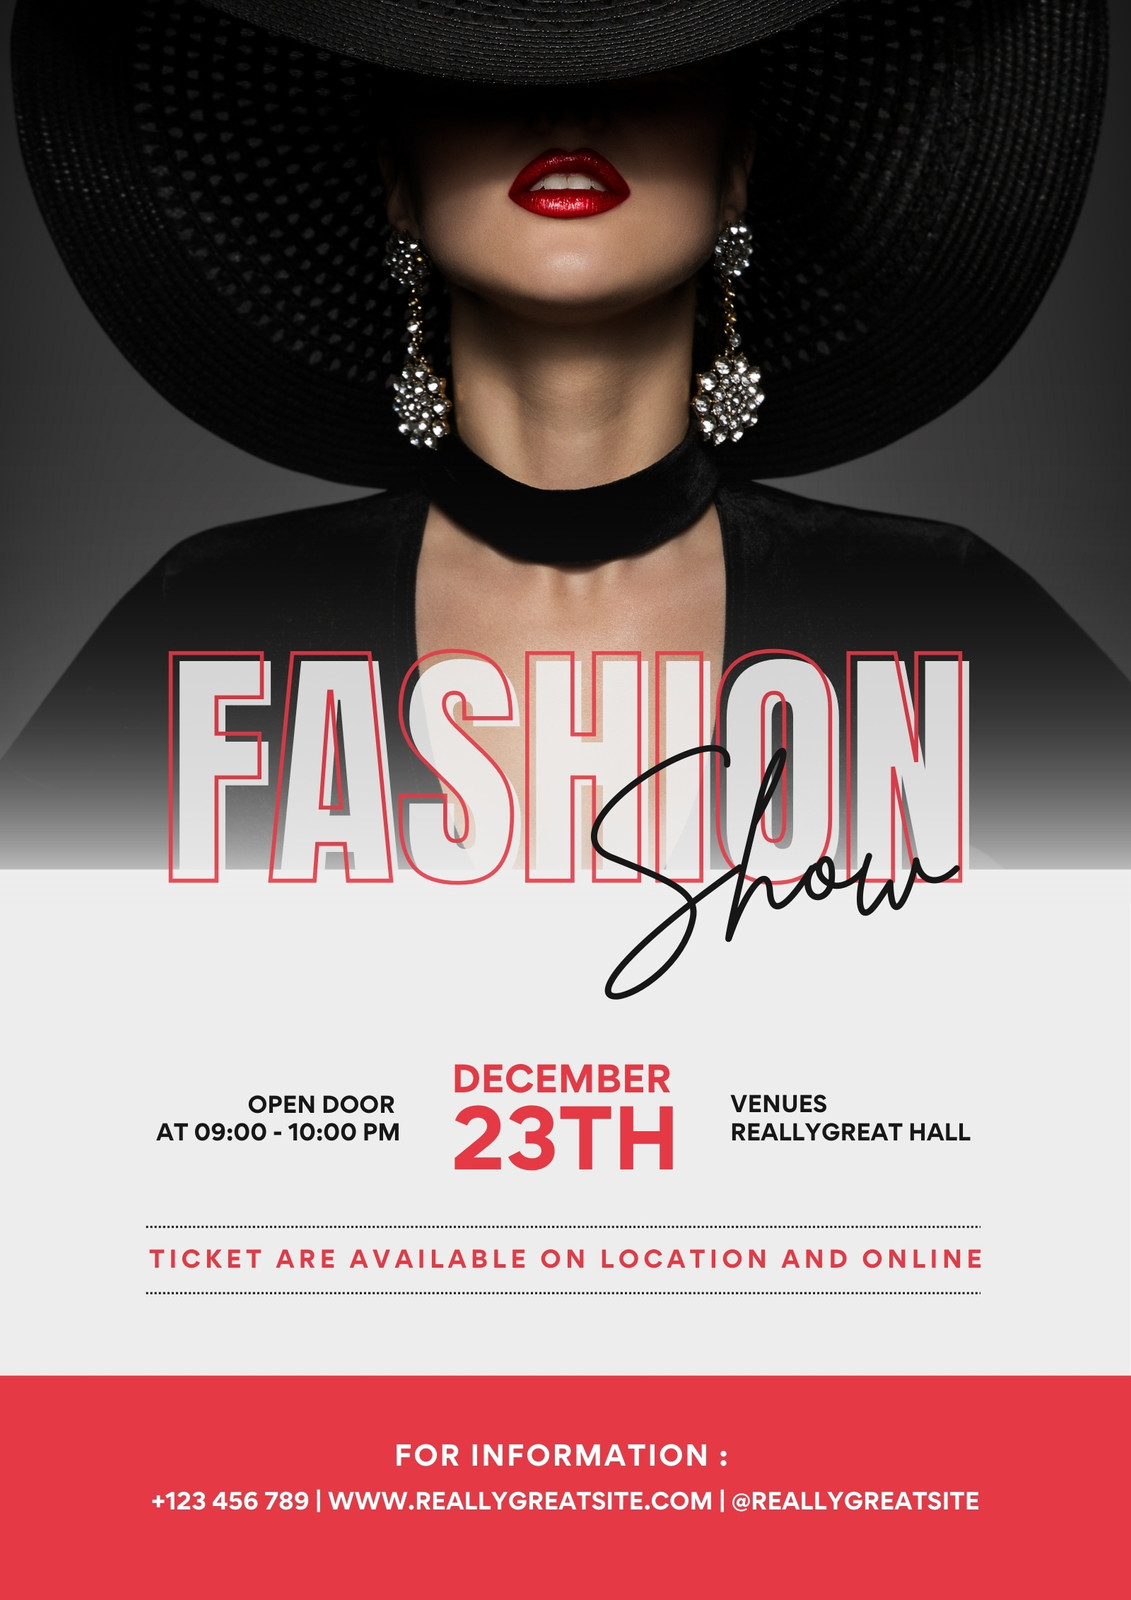 Design this Cool Fashion Show Poster layout online